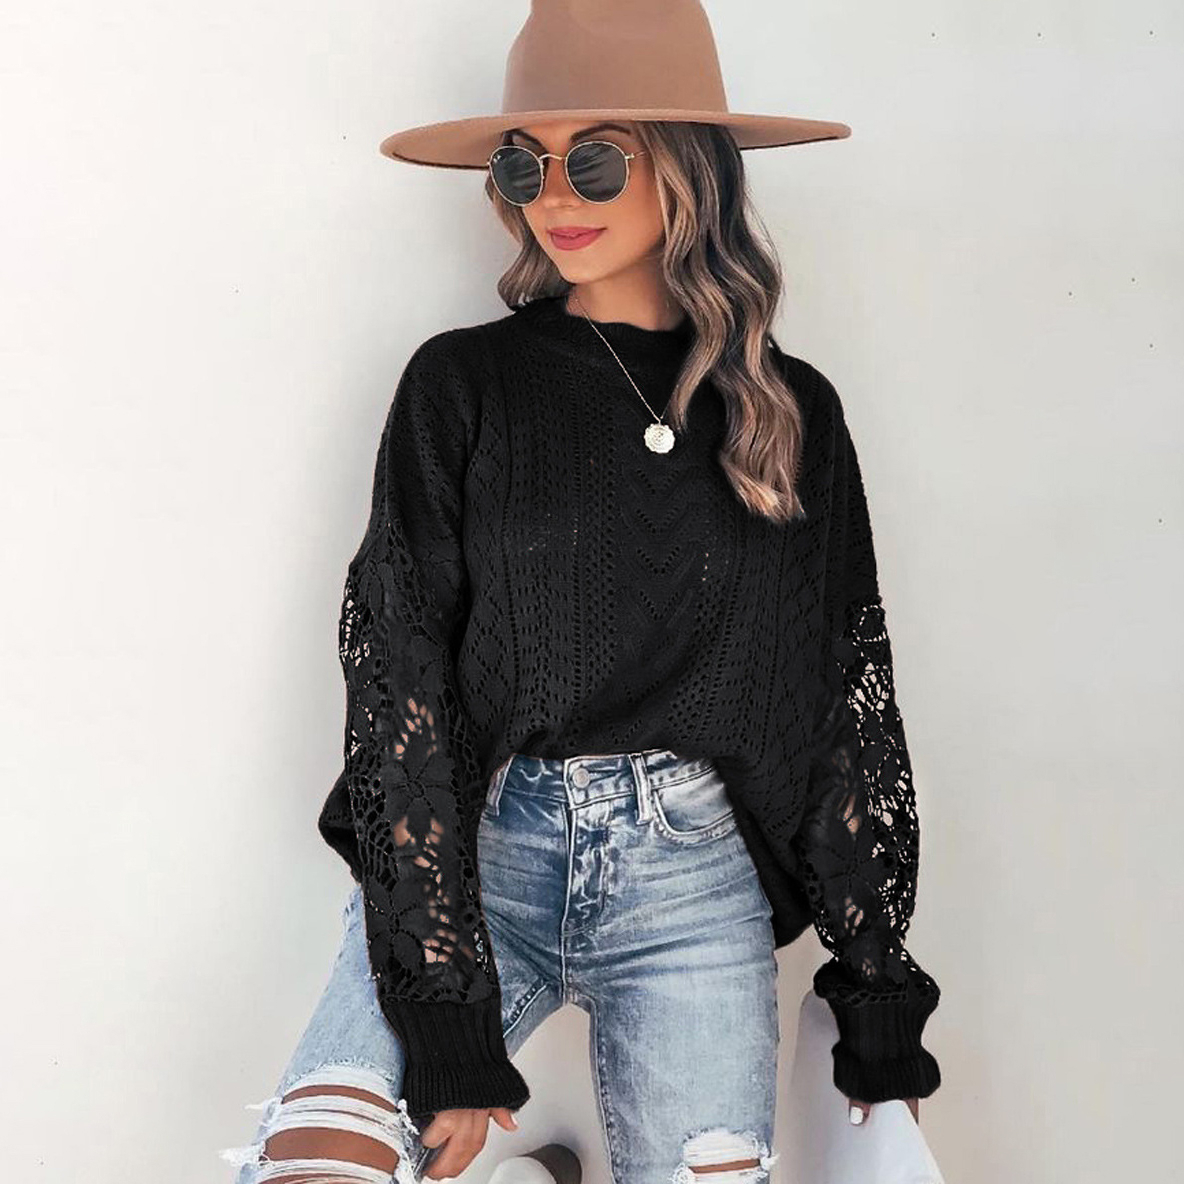 Lace Eyelet Knit Sweater, Casual Crew Neck Long Sleeve Sweater, Women's Clothing - Black, XL